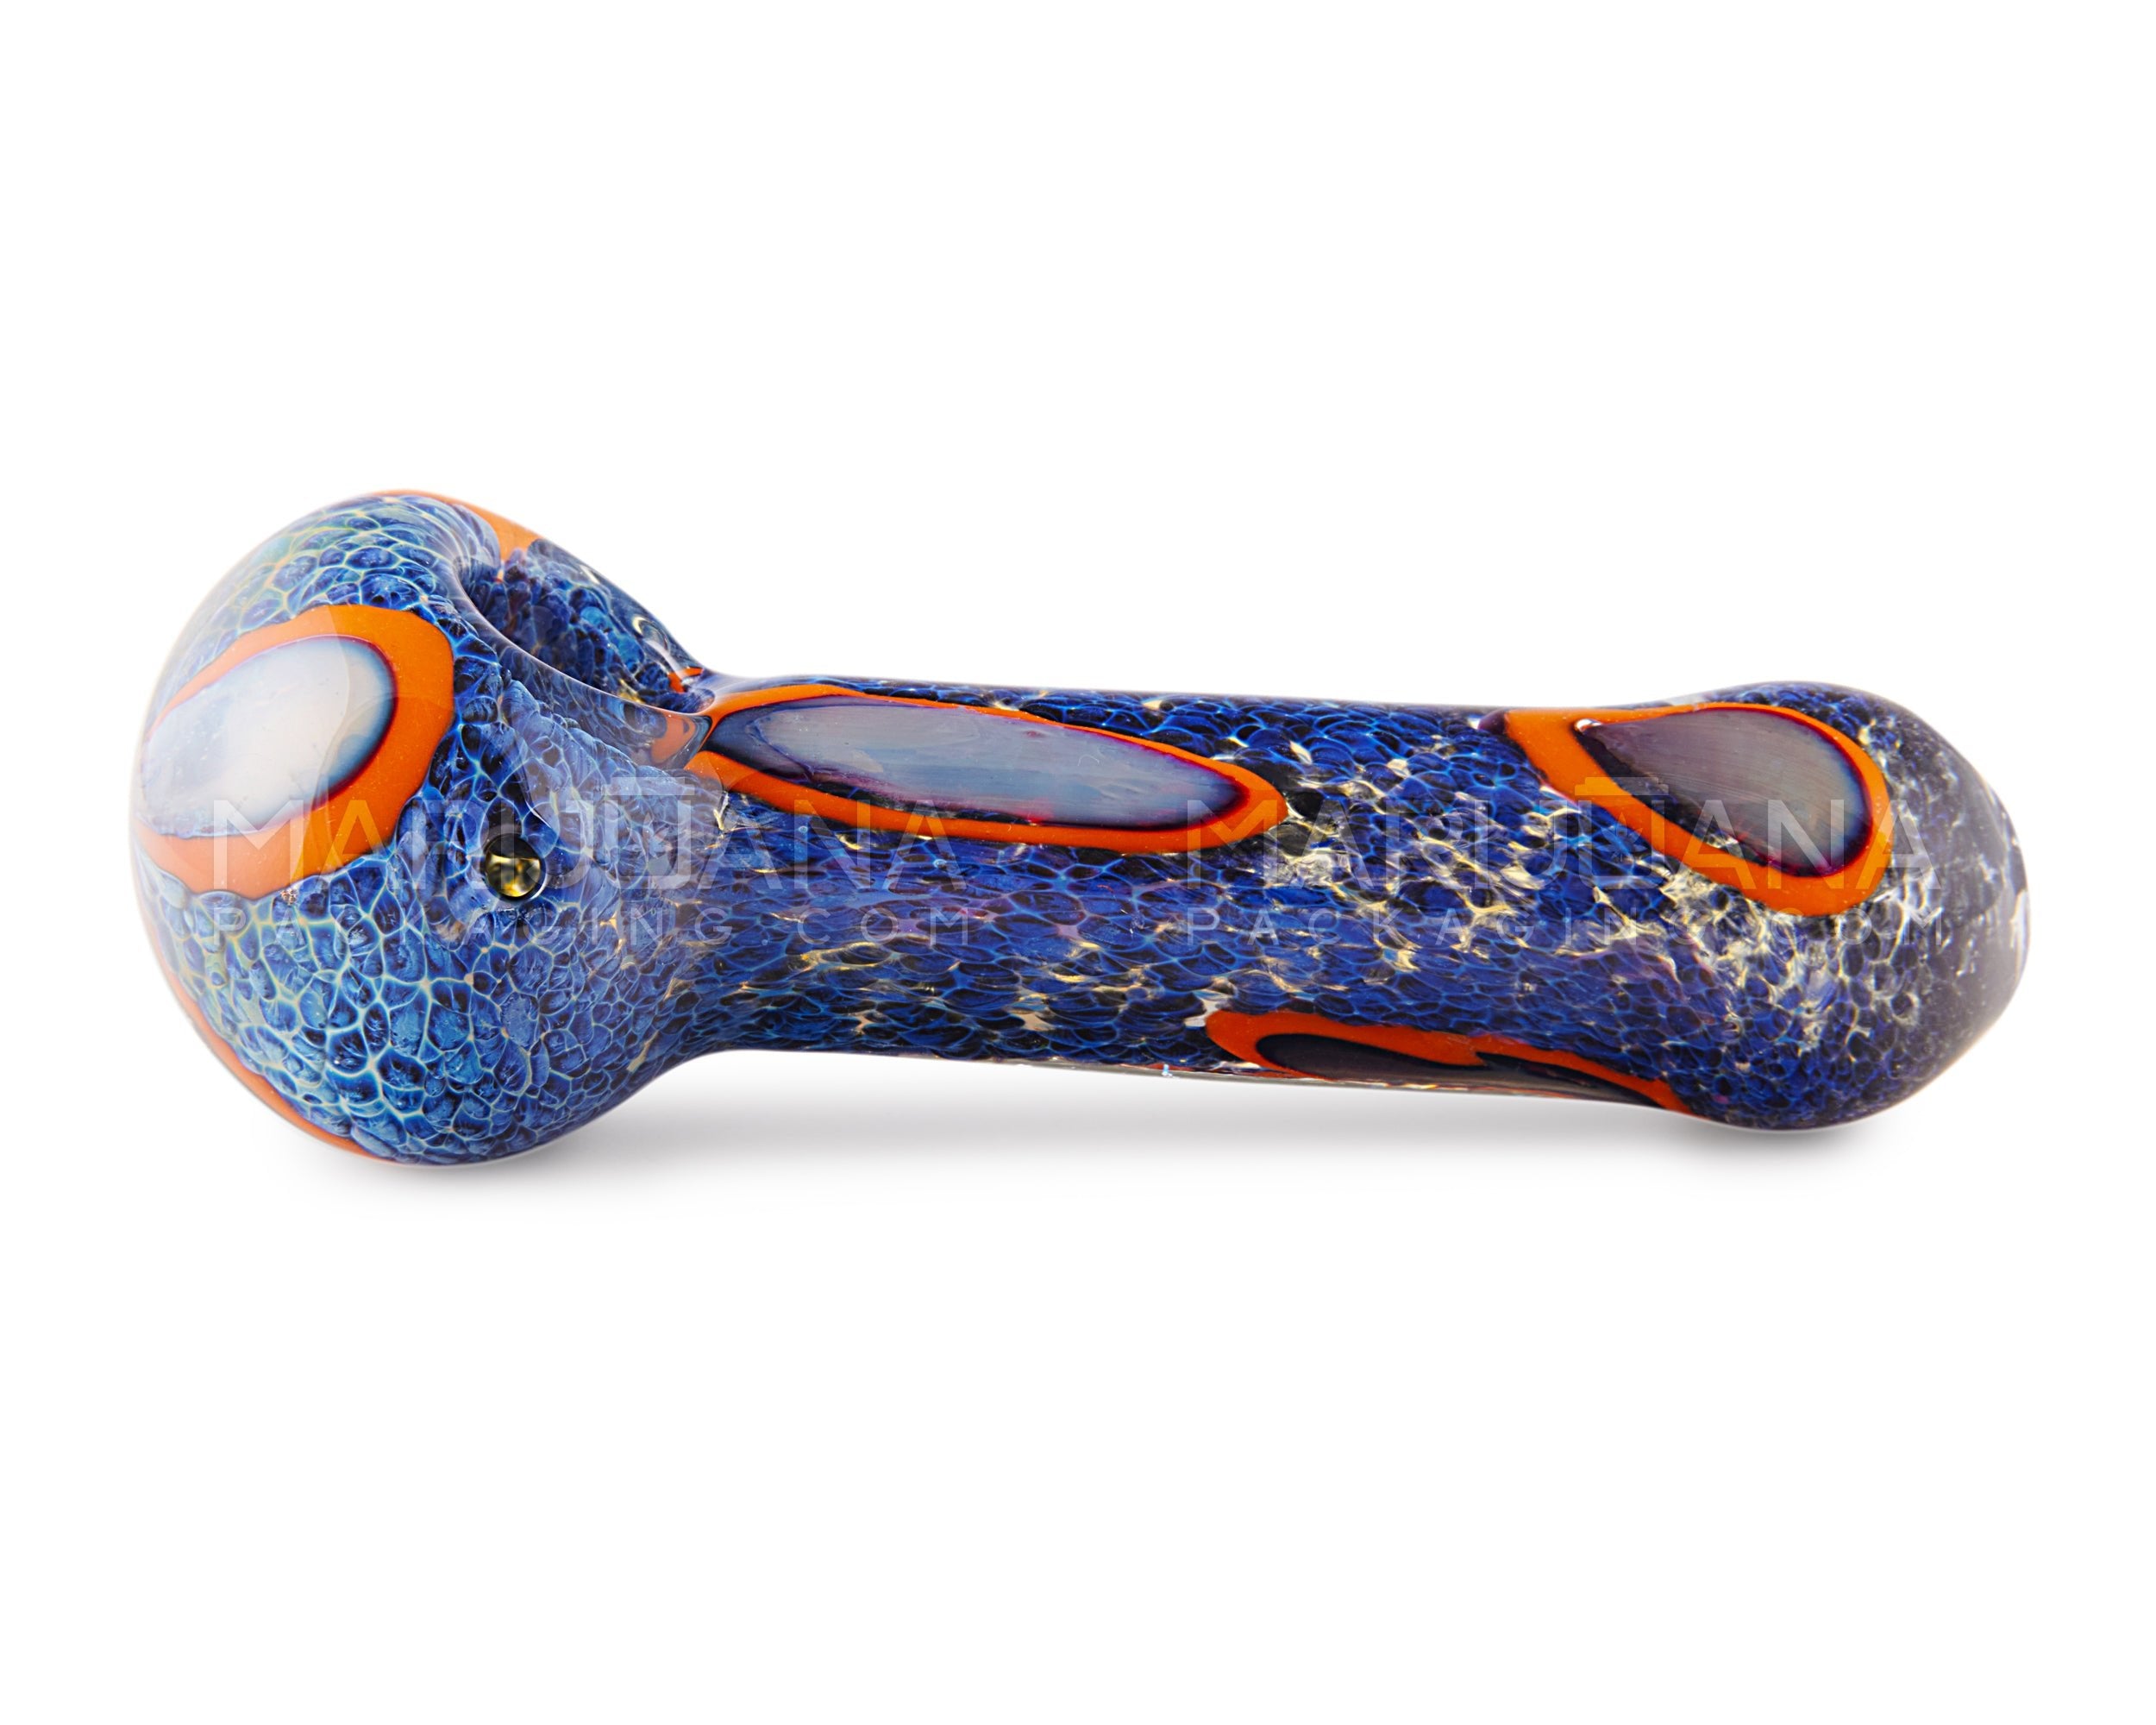 Frit & Fumed Swirl Spoon Hand Pipe | 5in Long - Glass - Assorted - 4